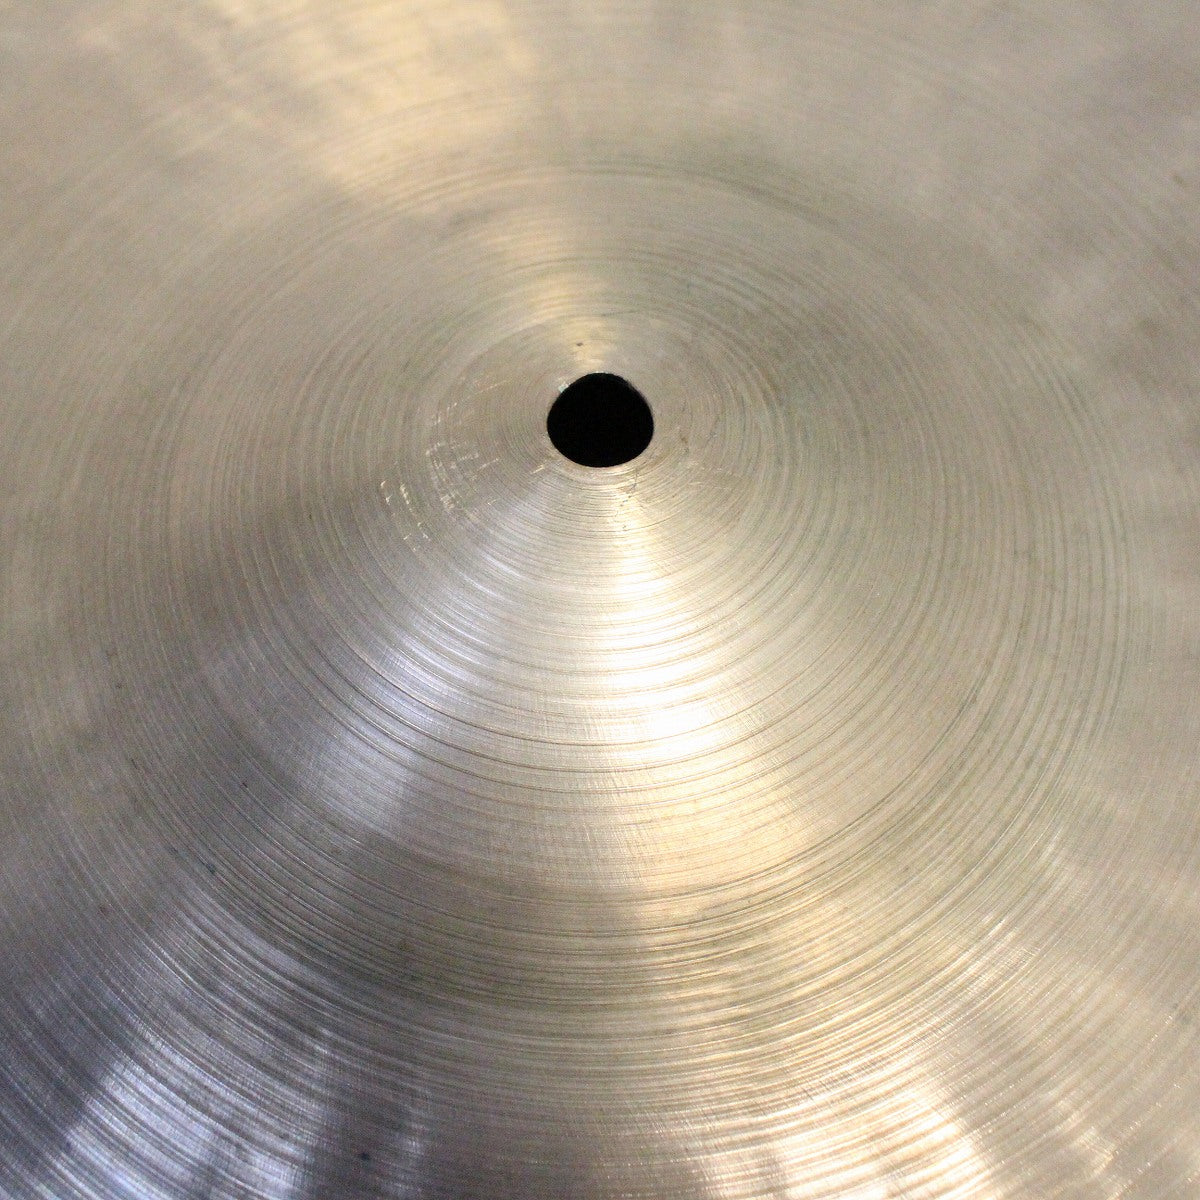 USED ZILDJIAN / Istanbul K New Stamp 18" RIDE 1633g Old K Ride Cymbal [08]